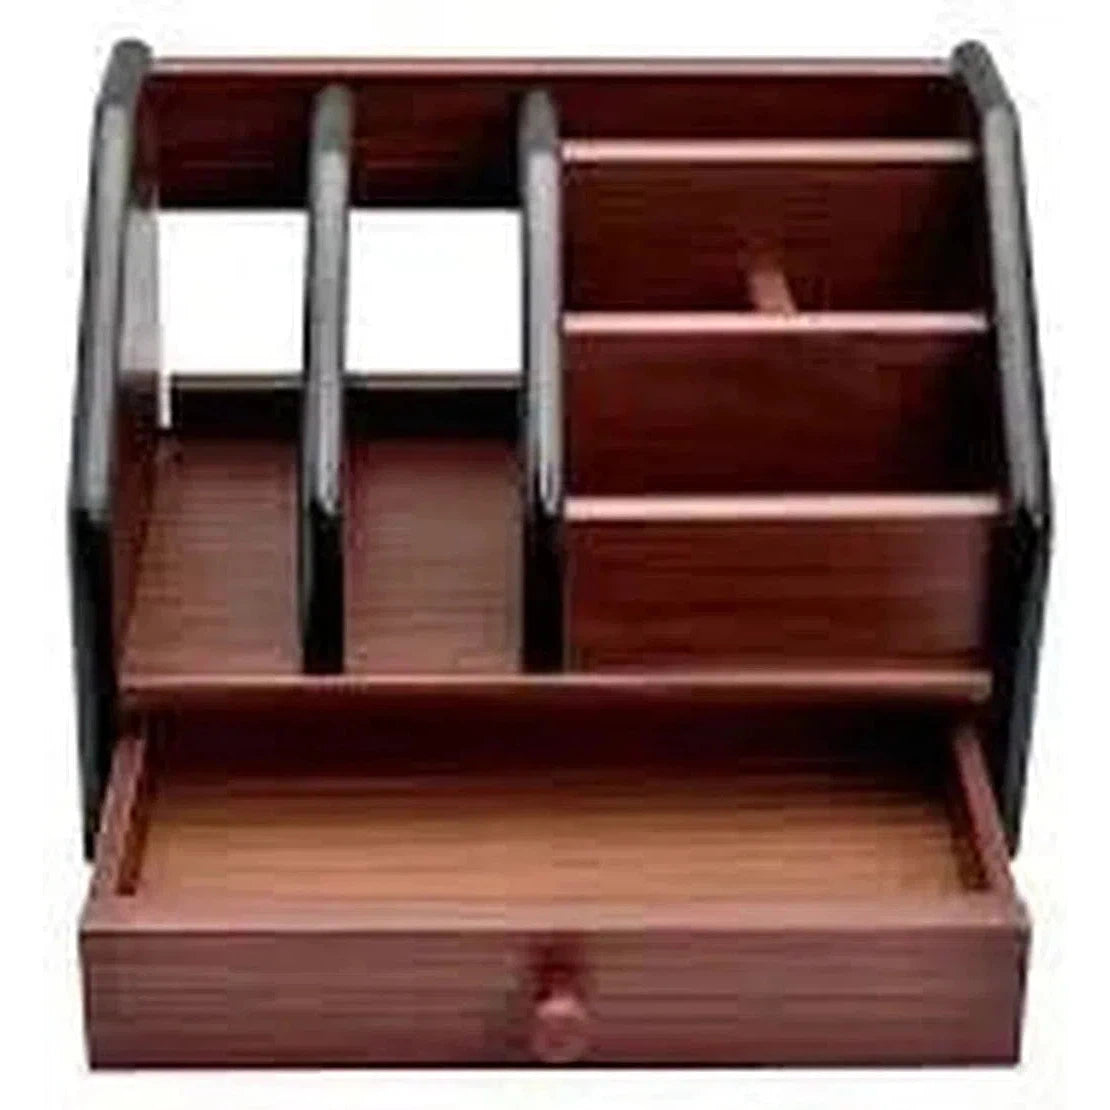 Wooden Pen Stand (8003)-Accessories And Organizers-Other-Star Light Kuwait